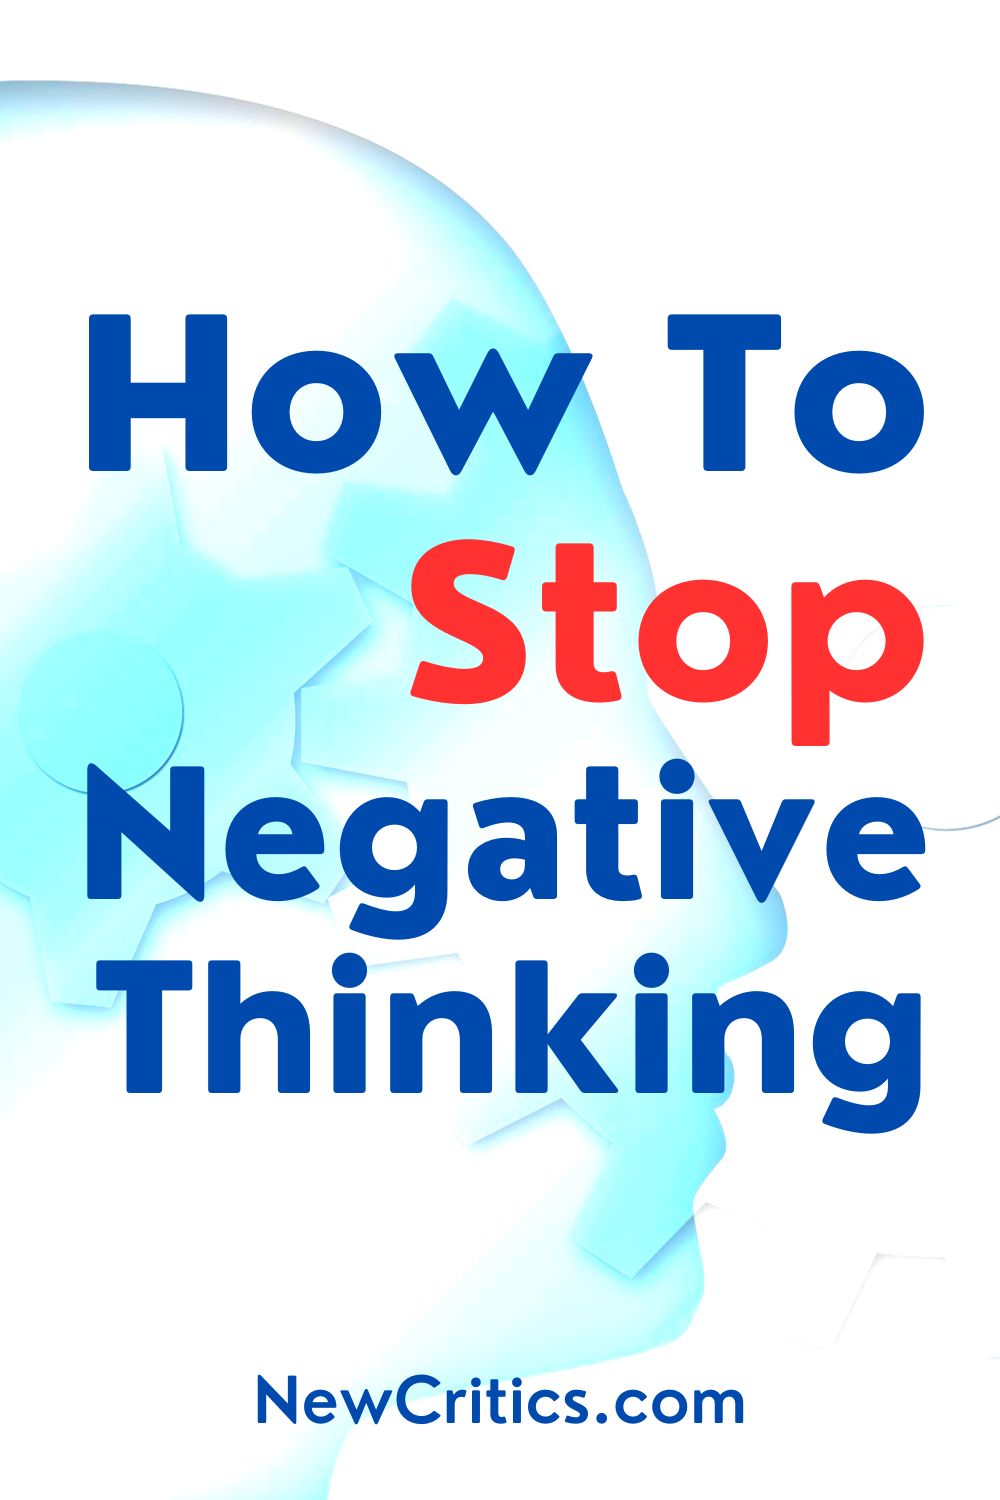 How To Stop Negative Thinking / Canva